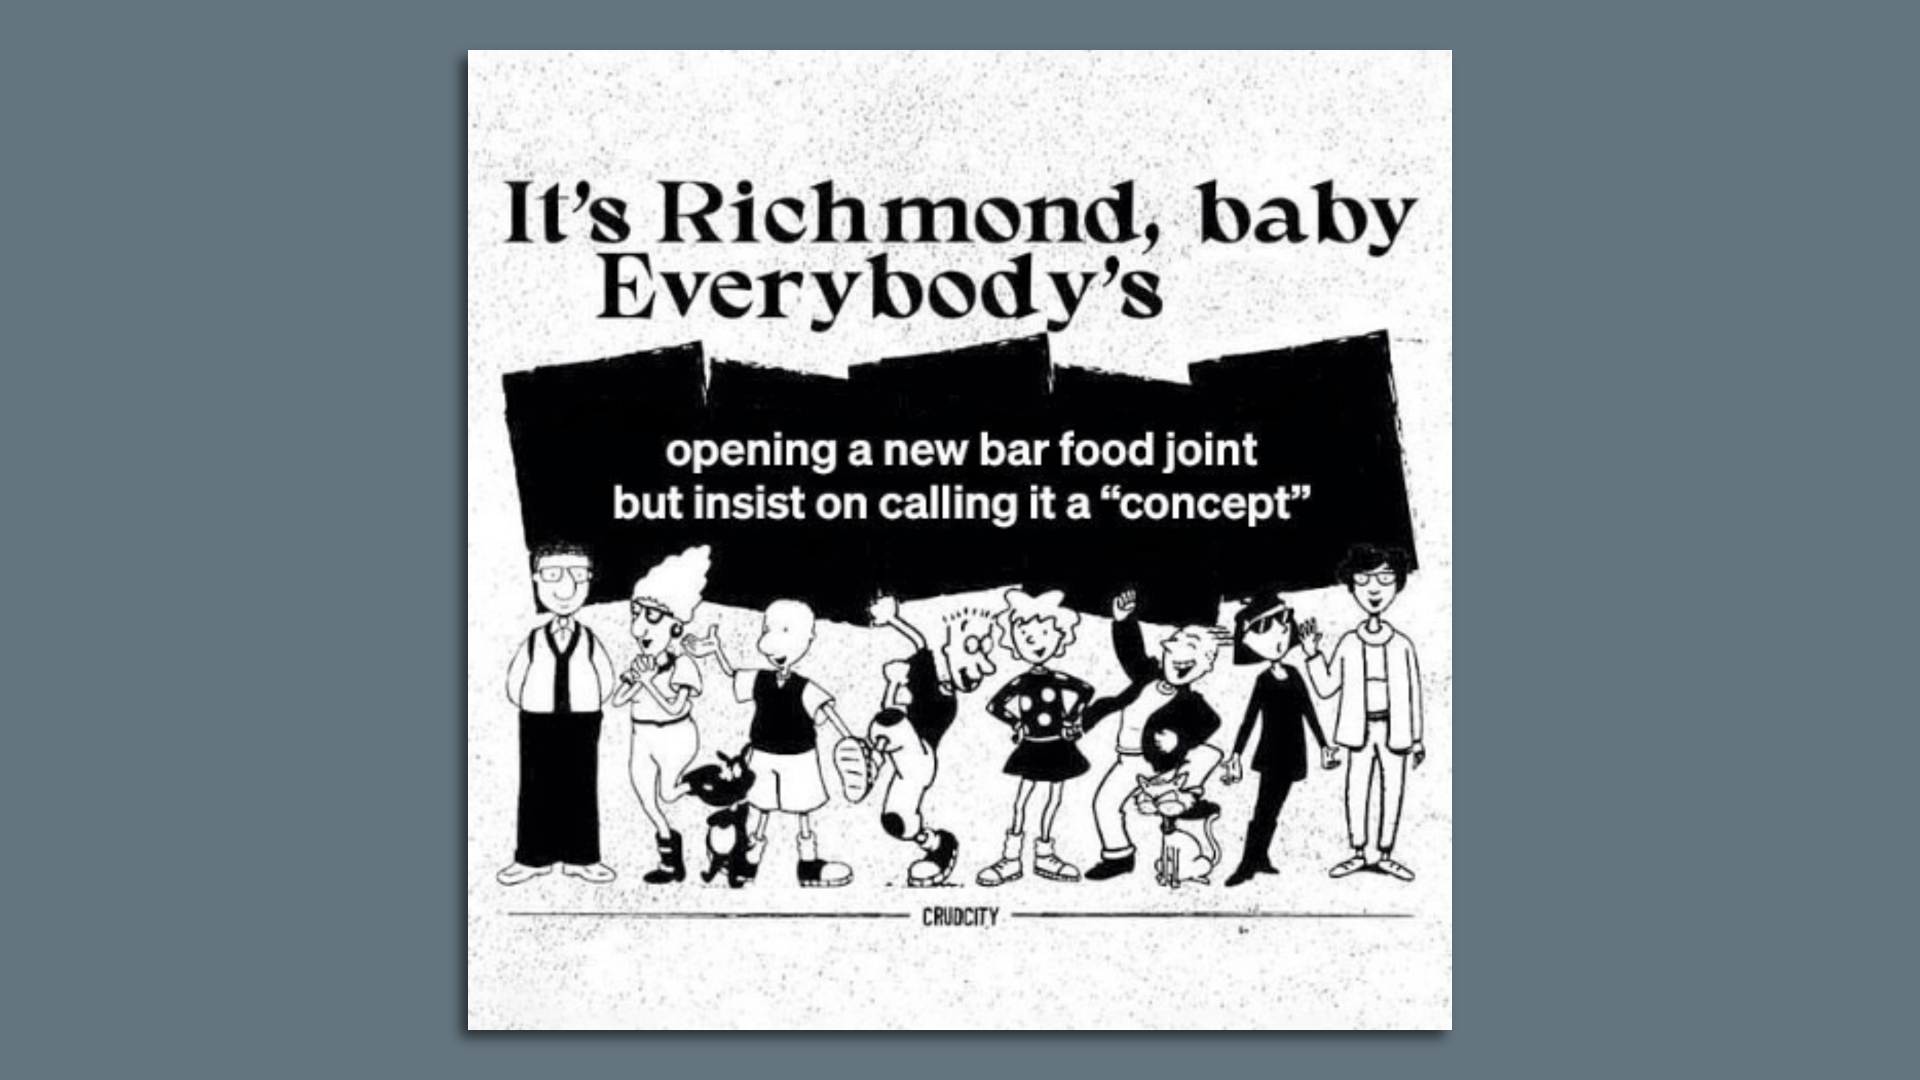 Meme with 10 characters from show doug, above them is a sign that says, "it's Richmond, Baby, Everybody's opening a new restaurant but calling it a concept 